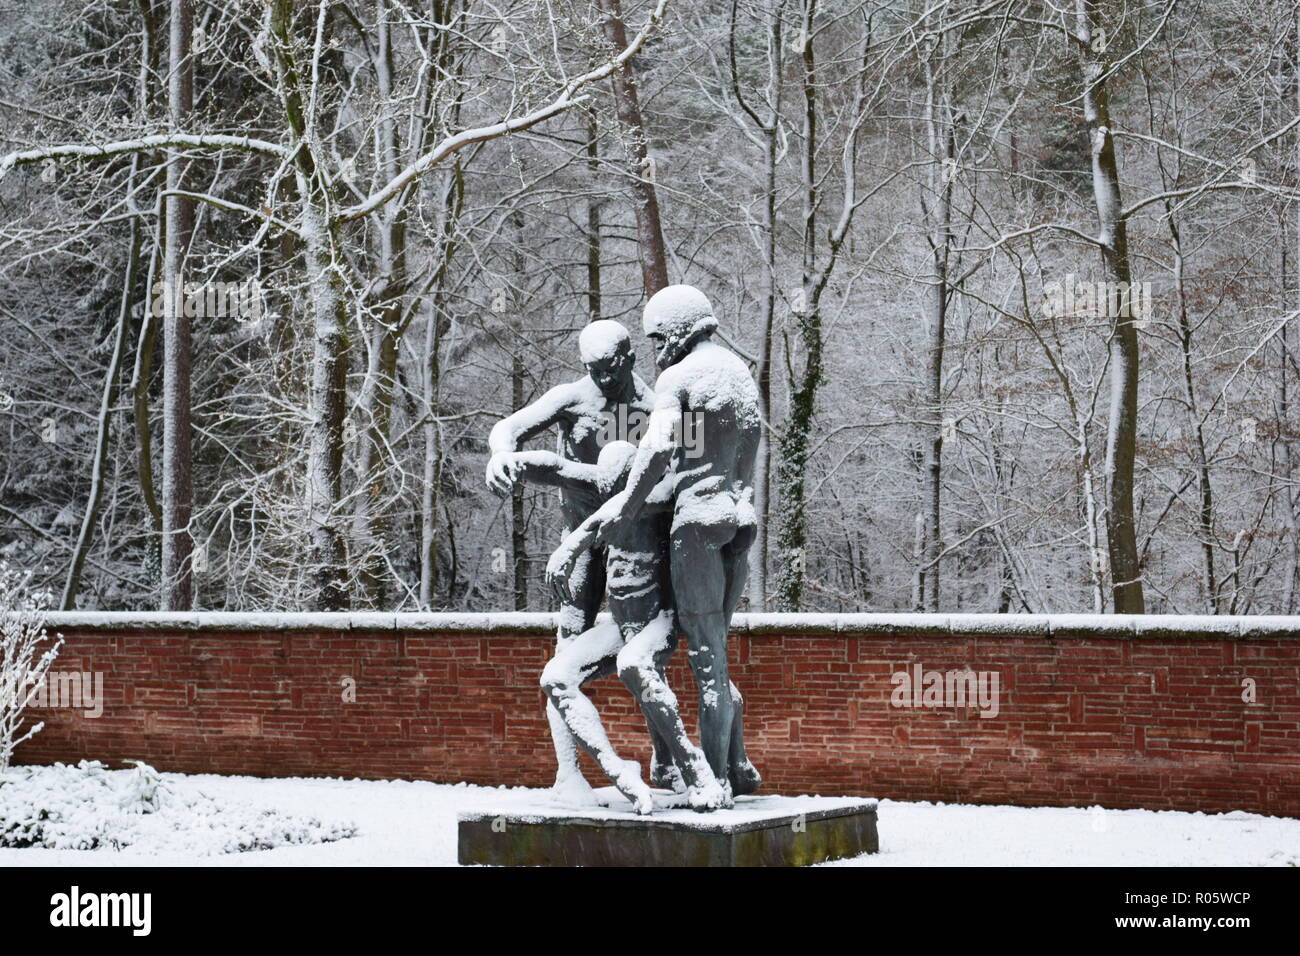 A bronze statue covered in snow at the War Cemetery in Reimsbach depicts two men carrying a deadly victim as a symbol of the helplessness of man . Stock Photo